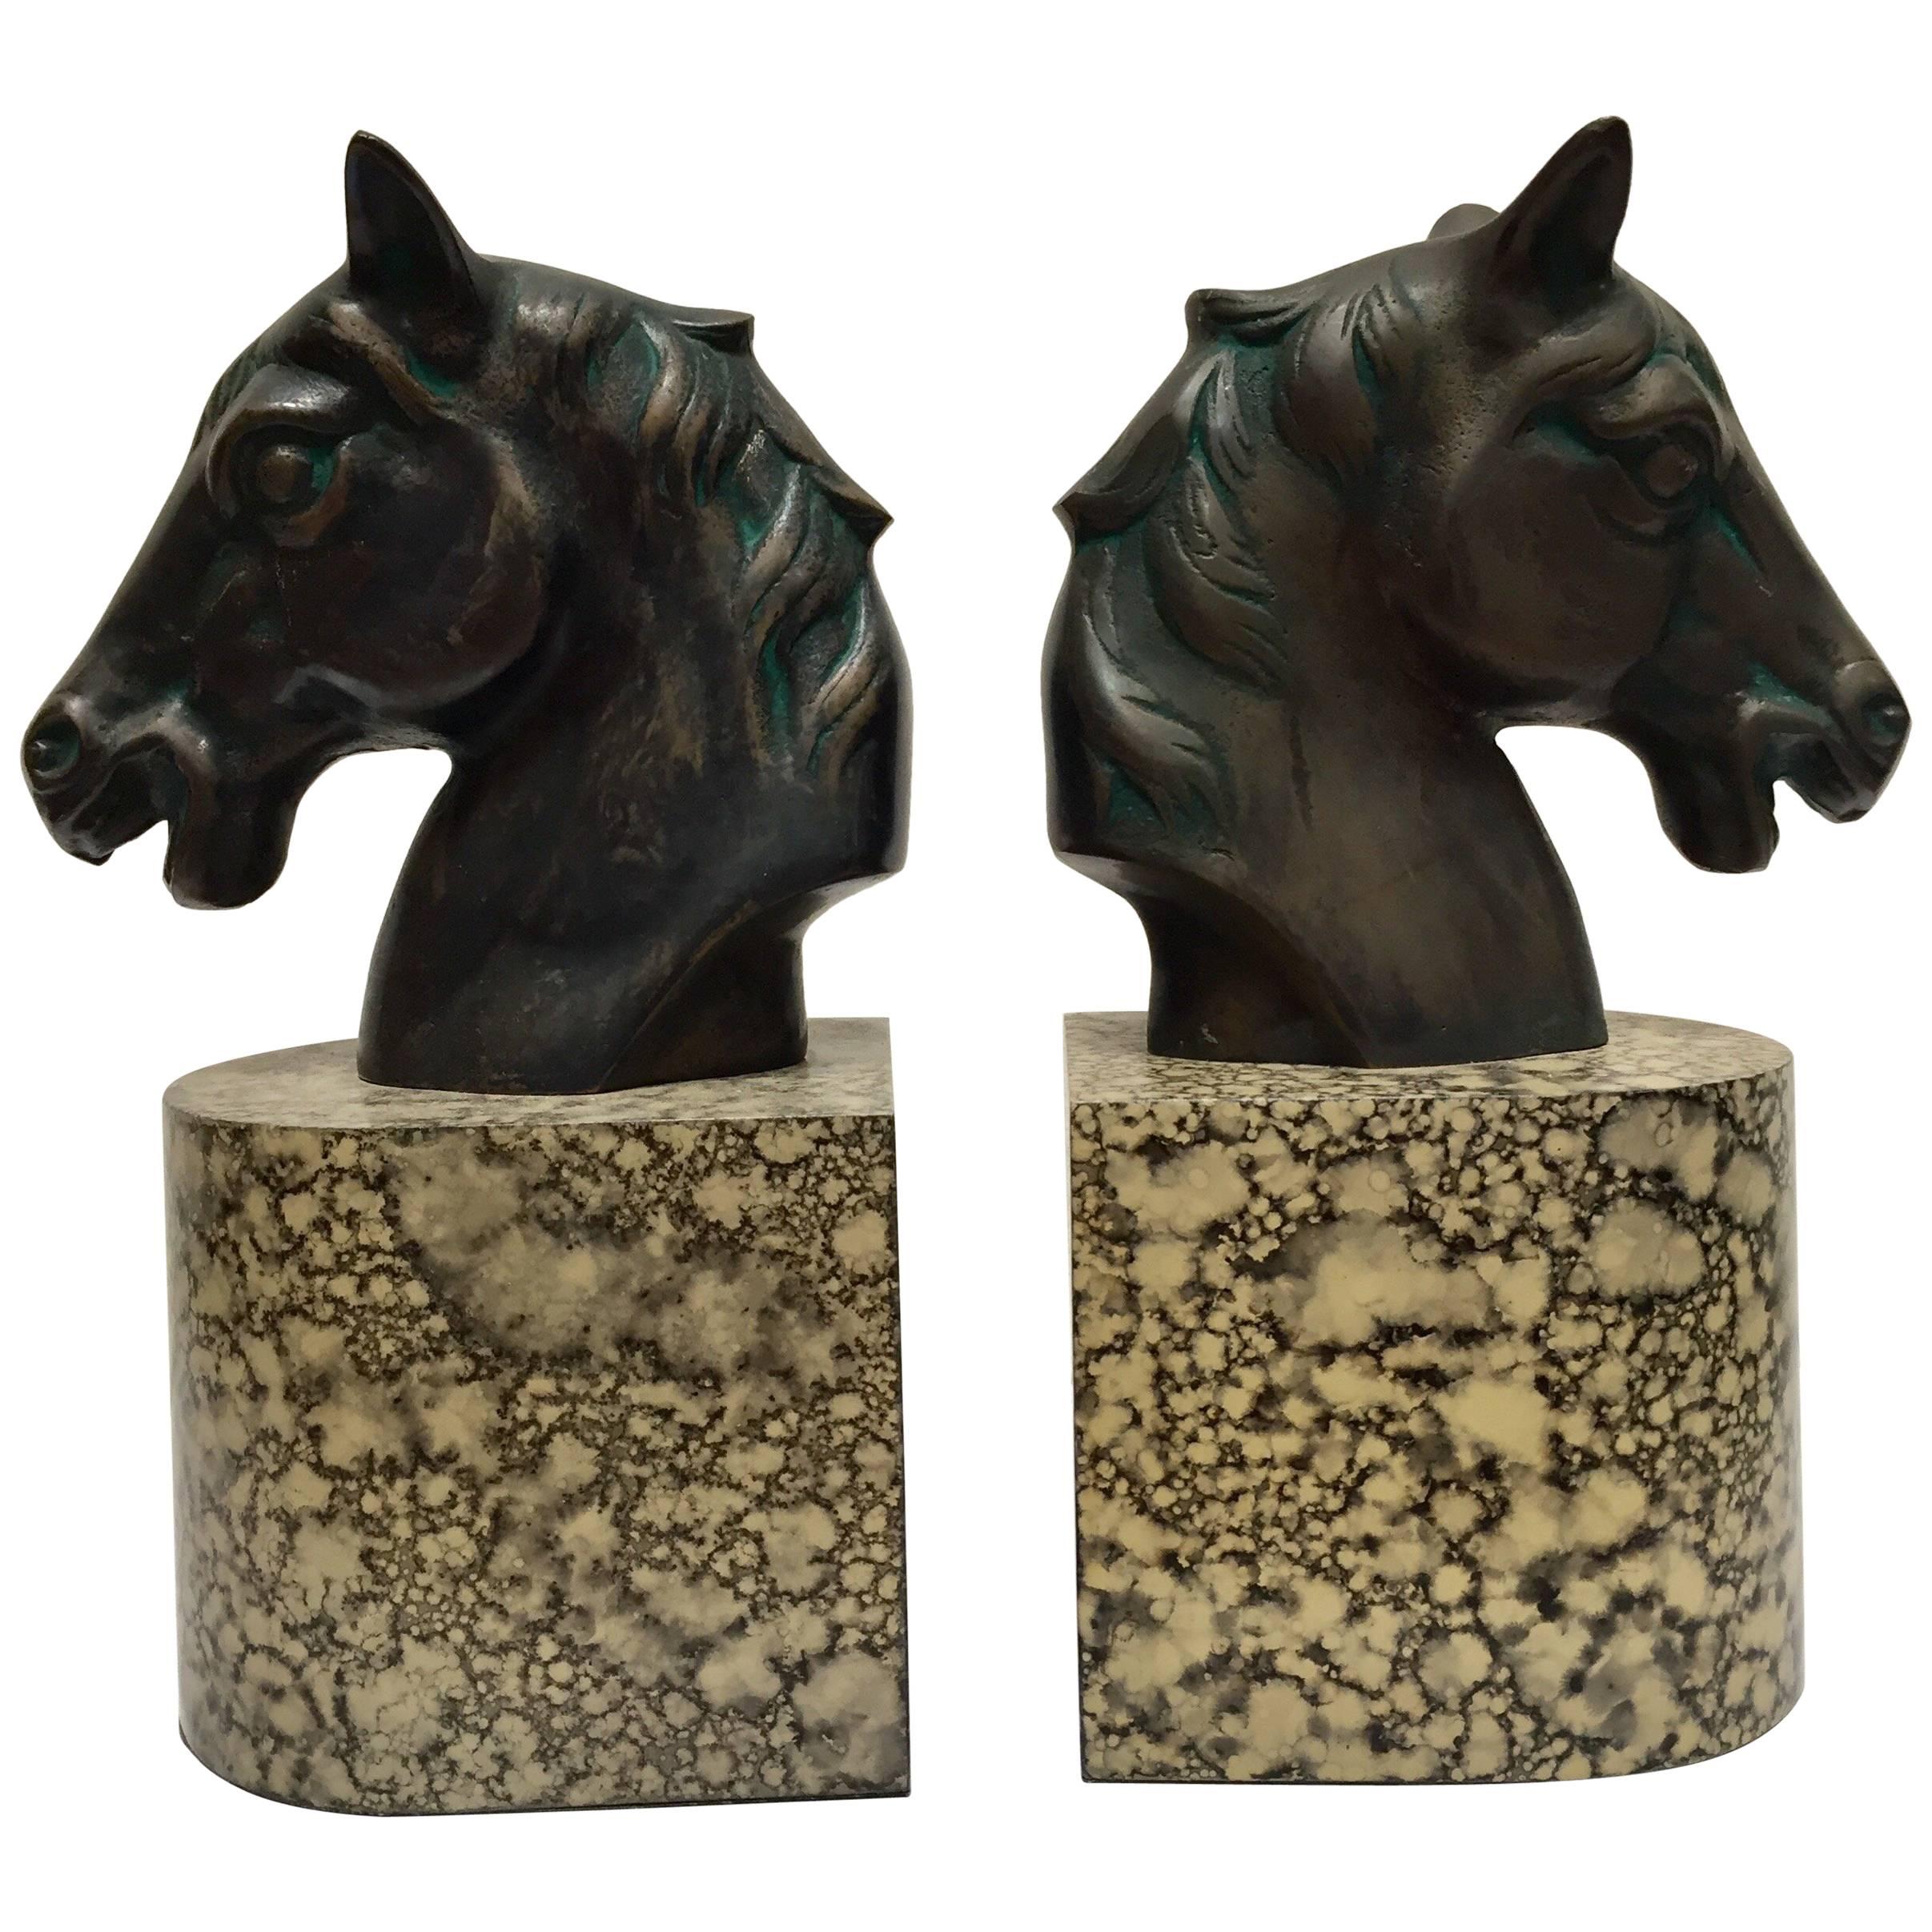 Cast Bronze Sculptures of Black Horses Bust Bookends on Stand 